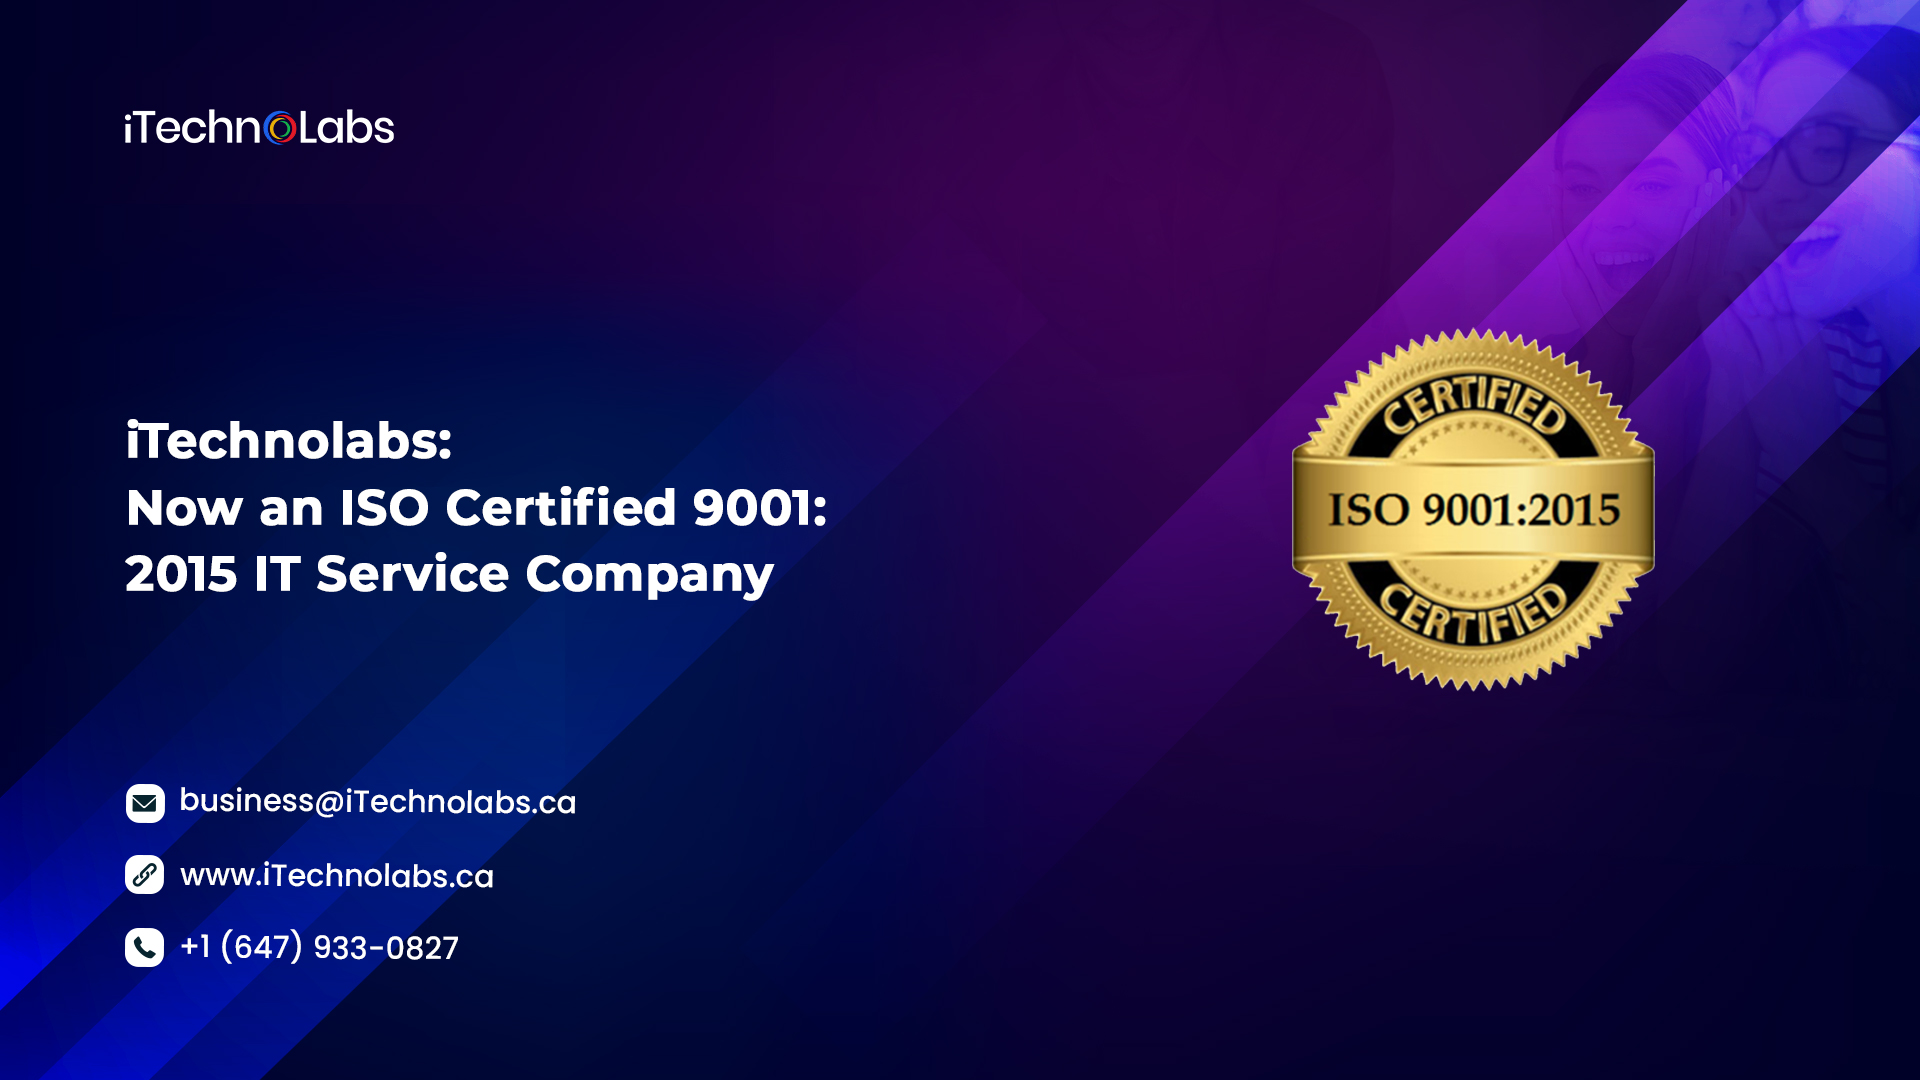 itechnolabs now an iso certified 9001 2015 it service company